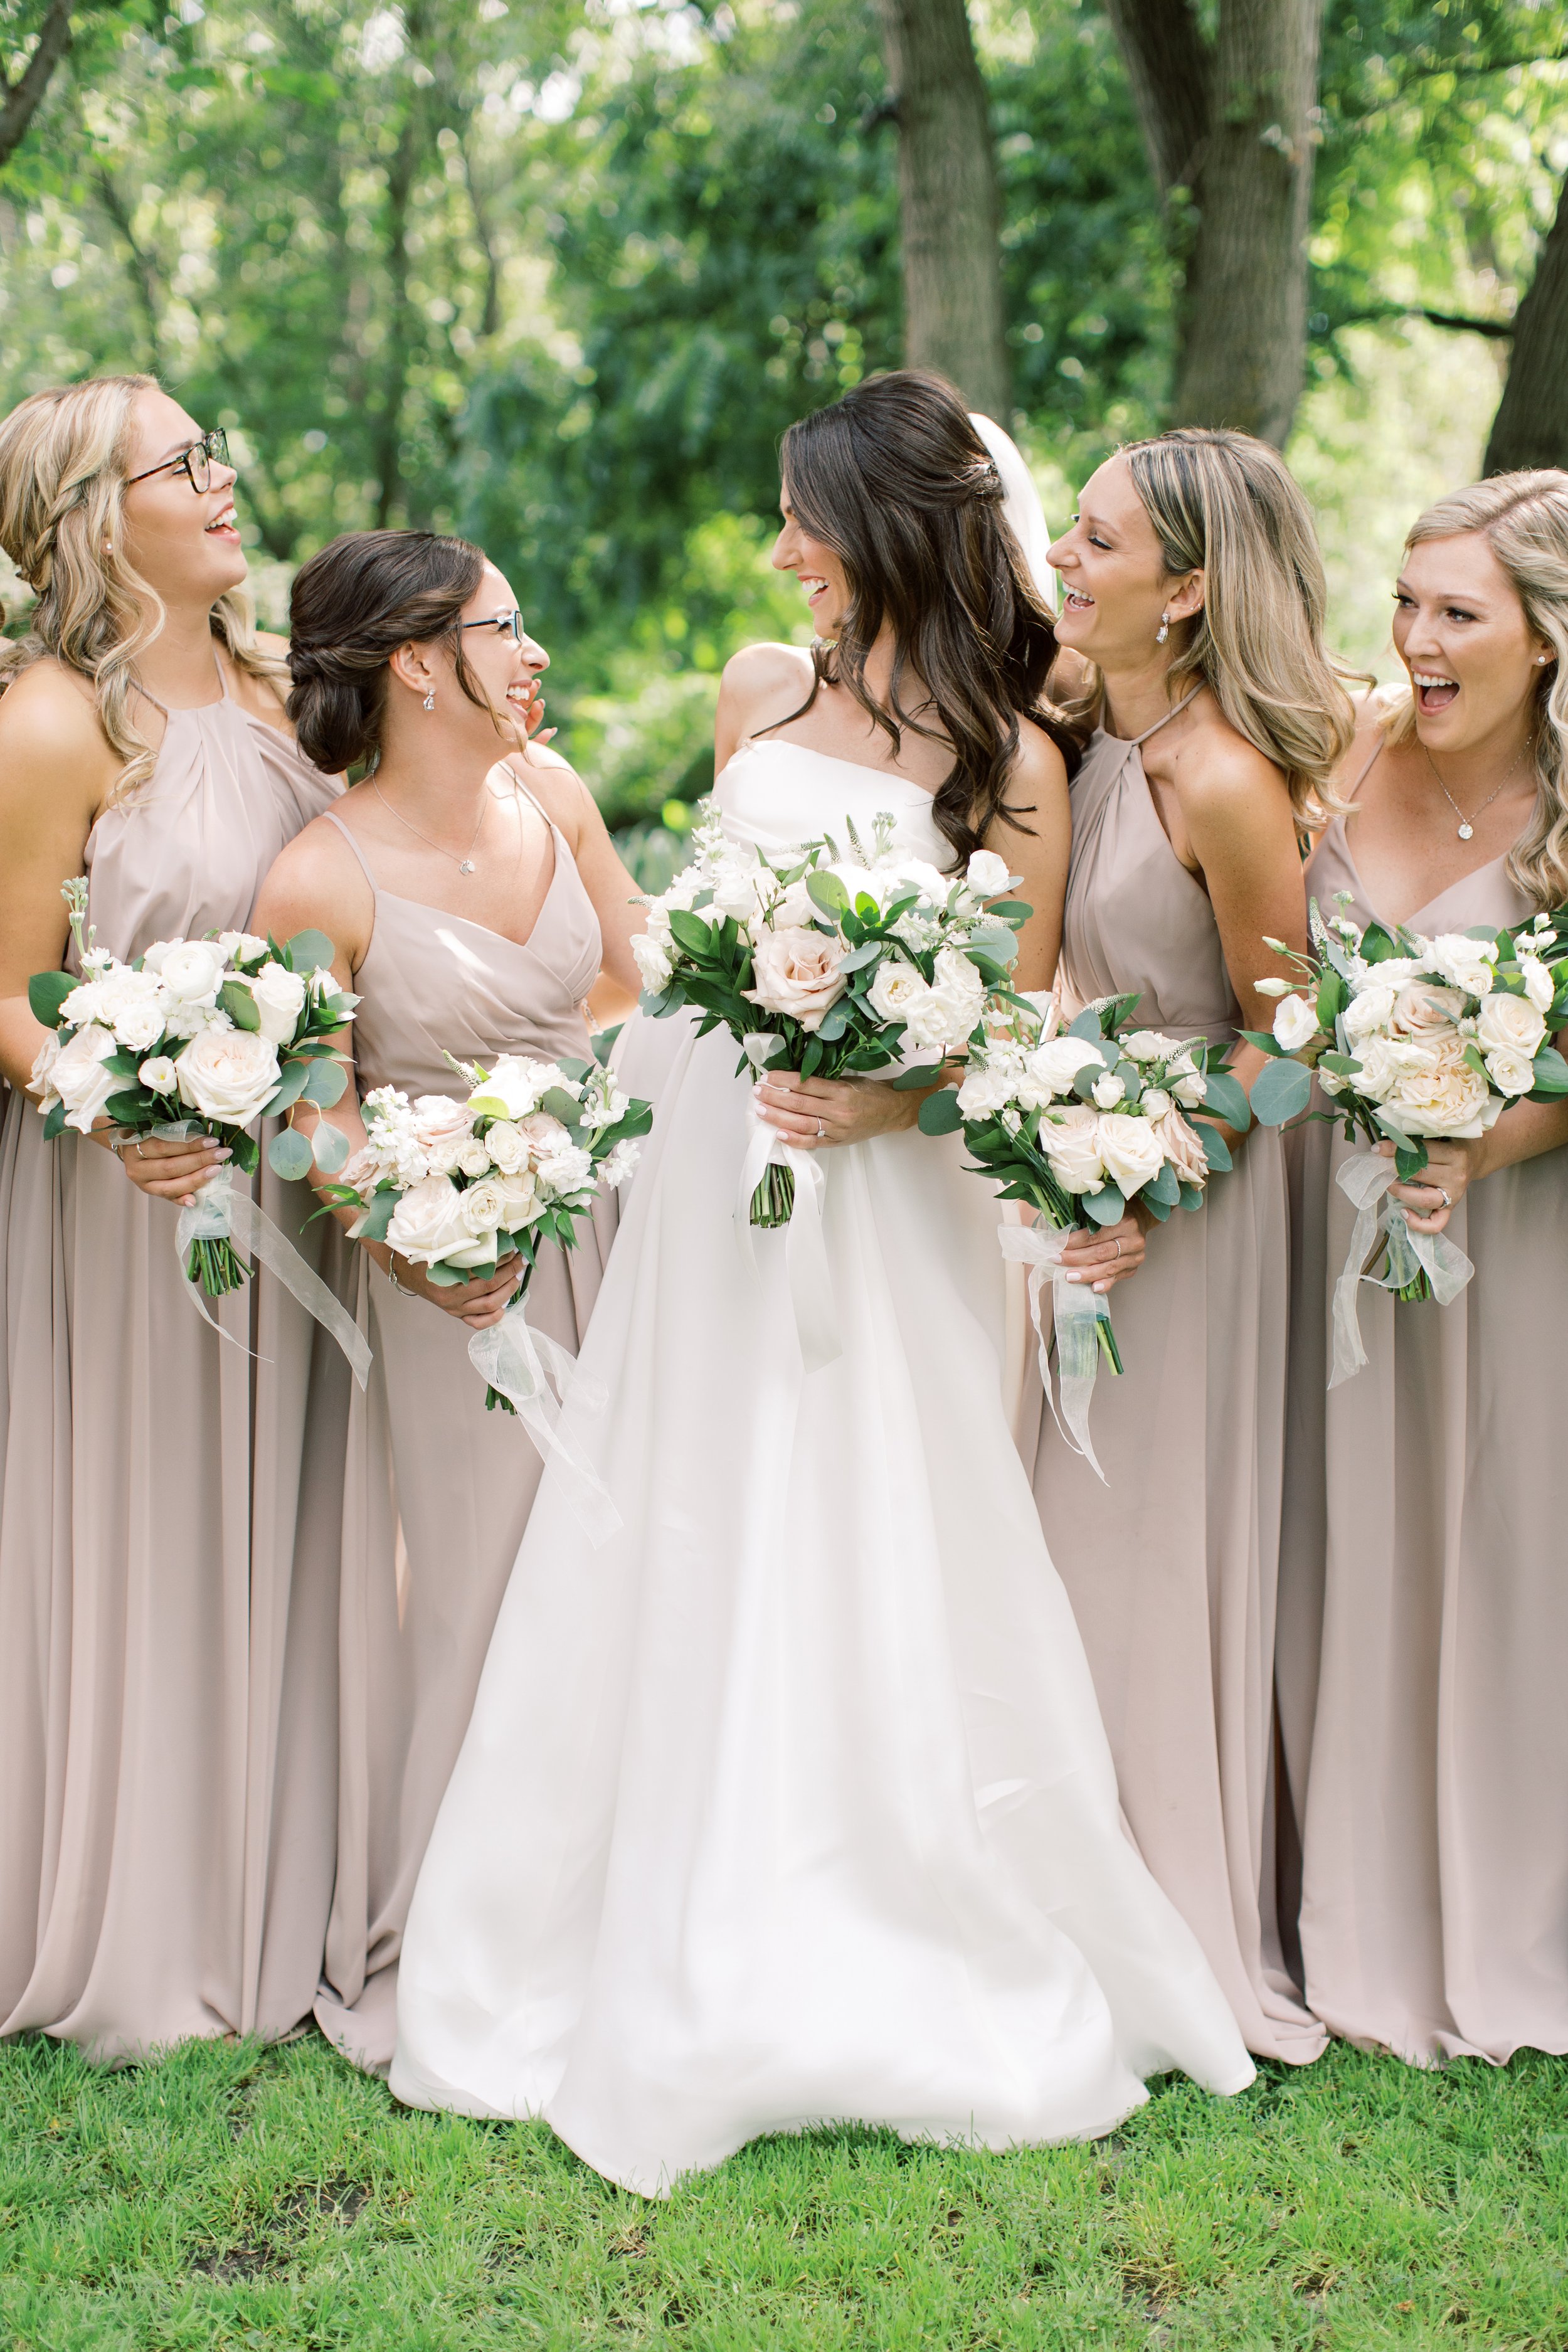 brittany-williams-photography-dusty-rose-bridesmaids-dresses.jpg